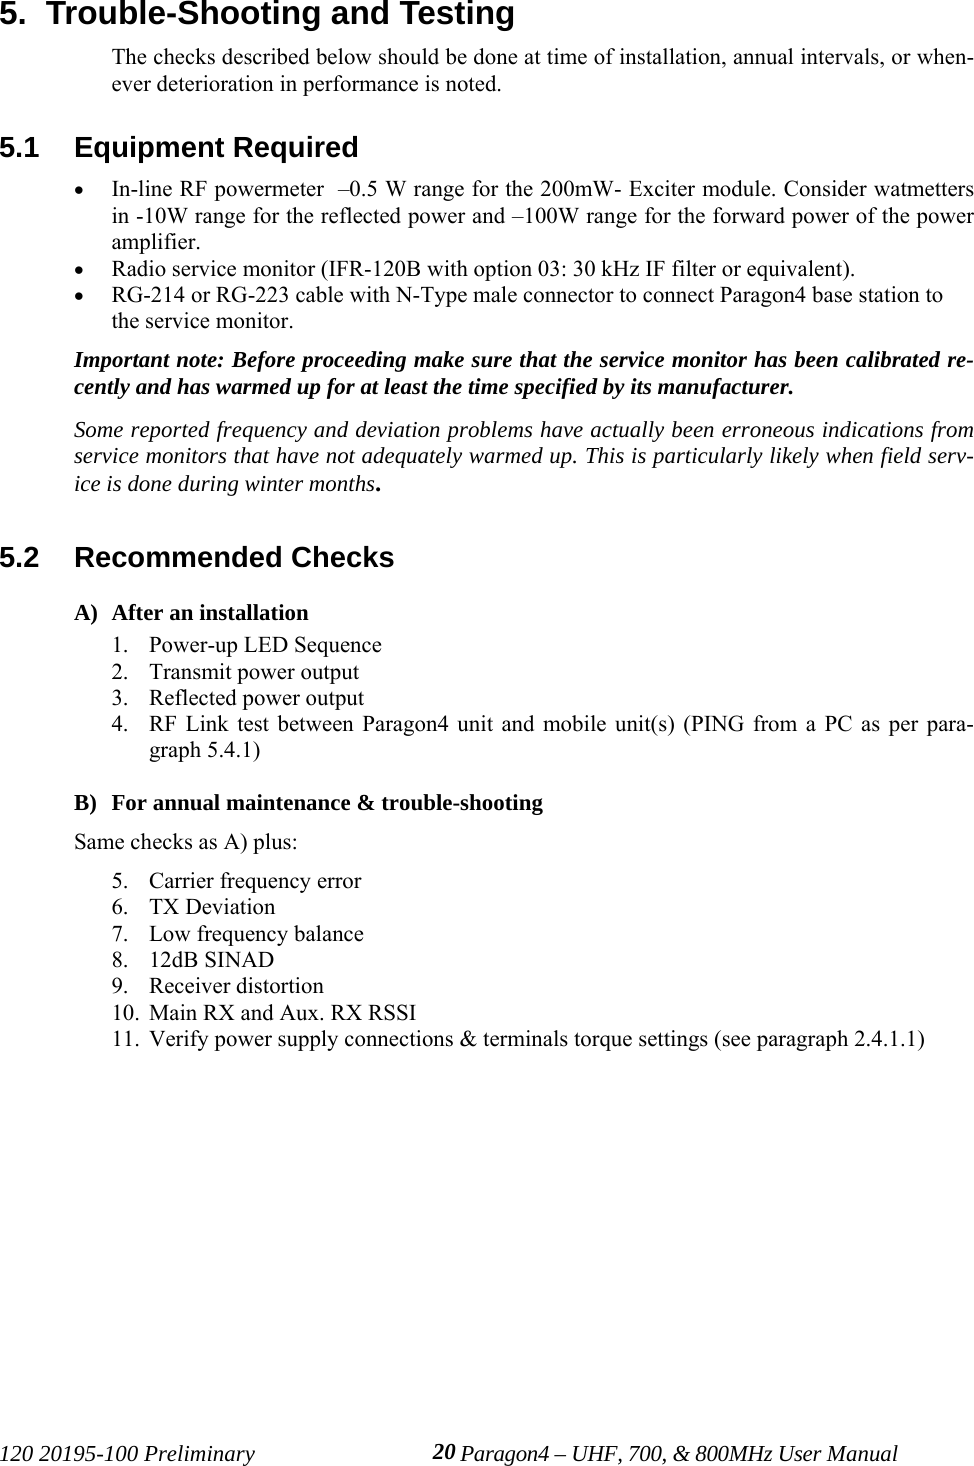 120 20195-100 Preliminary Paragon4 – UHF, 700, &amp; 800MHz User Manual205.  Trouble-Shooting and Testing The checks described below should be done at time of installation, annual intervals, or when-ever deterioration in performance is noted.5.1  Equipment Required• In-line RF powermeter  –0.5 W range for the 200mW- Exciter module. Consider watmettersin -10W range for the reflected power and –100W range for the forward power of the poweramplifier.• Radio service monitor (IFR-120B with option 03: 30 kHz IF filter or equivalent).• RG-214 or RG-223 cable with N-Type male connector to connect Paragon4 base station tothe service monitor.Important note: Before proceeding make sure that the service monitor has been calibrated re-cently and has warmed up for at least the time specified by its manufacturer. Some reported frequency and deviation problems have actually been erroneous indications fromservice monitors that have not adequately warmed up. This is particularly likely when field serv-ice is done during winter months.5.2  Recommended Checks  A) After an installation1. Power-up LED Sequence2. Transmit power output3. Reflected power output4. RF Link test between Paragon4 unit and mobile unit(s) (PING from a PC as per para-graph 5.4.1) B) For annual maintenance &amp; trouble-shootingSame checks as A) plus:5. Carrier frequency error6. TX Deviation7. Low frequency balance8. 12dB SINAD9. Receiver distortion10. Main RX and Aux. RX RSSI11. Verify power supply connections &amp; terminals torque settings (see paragraph 2.4.1.1)